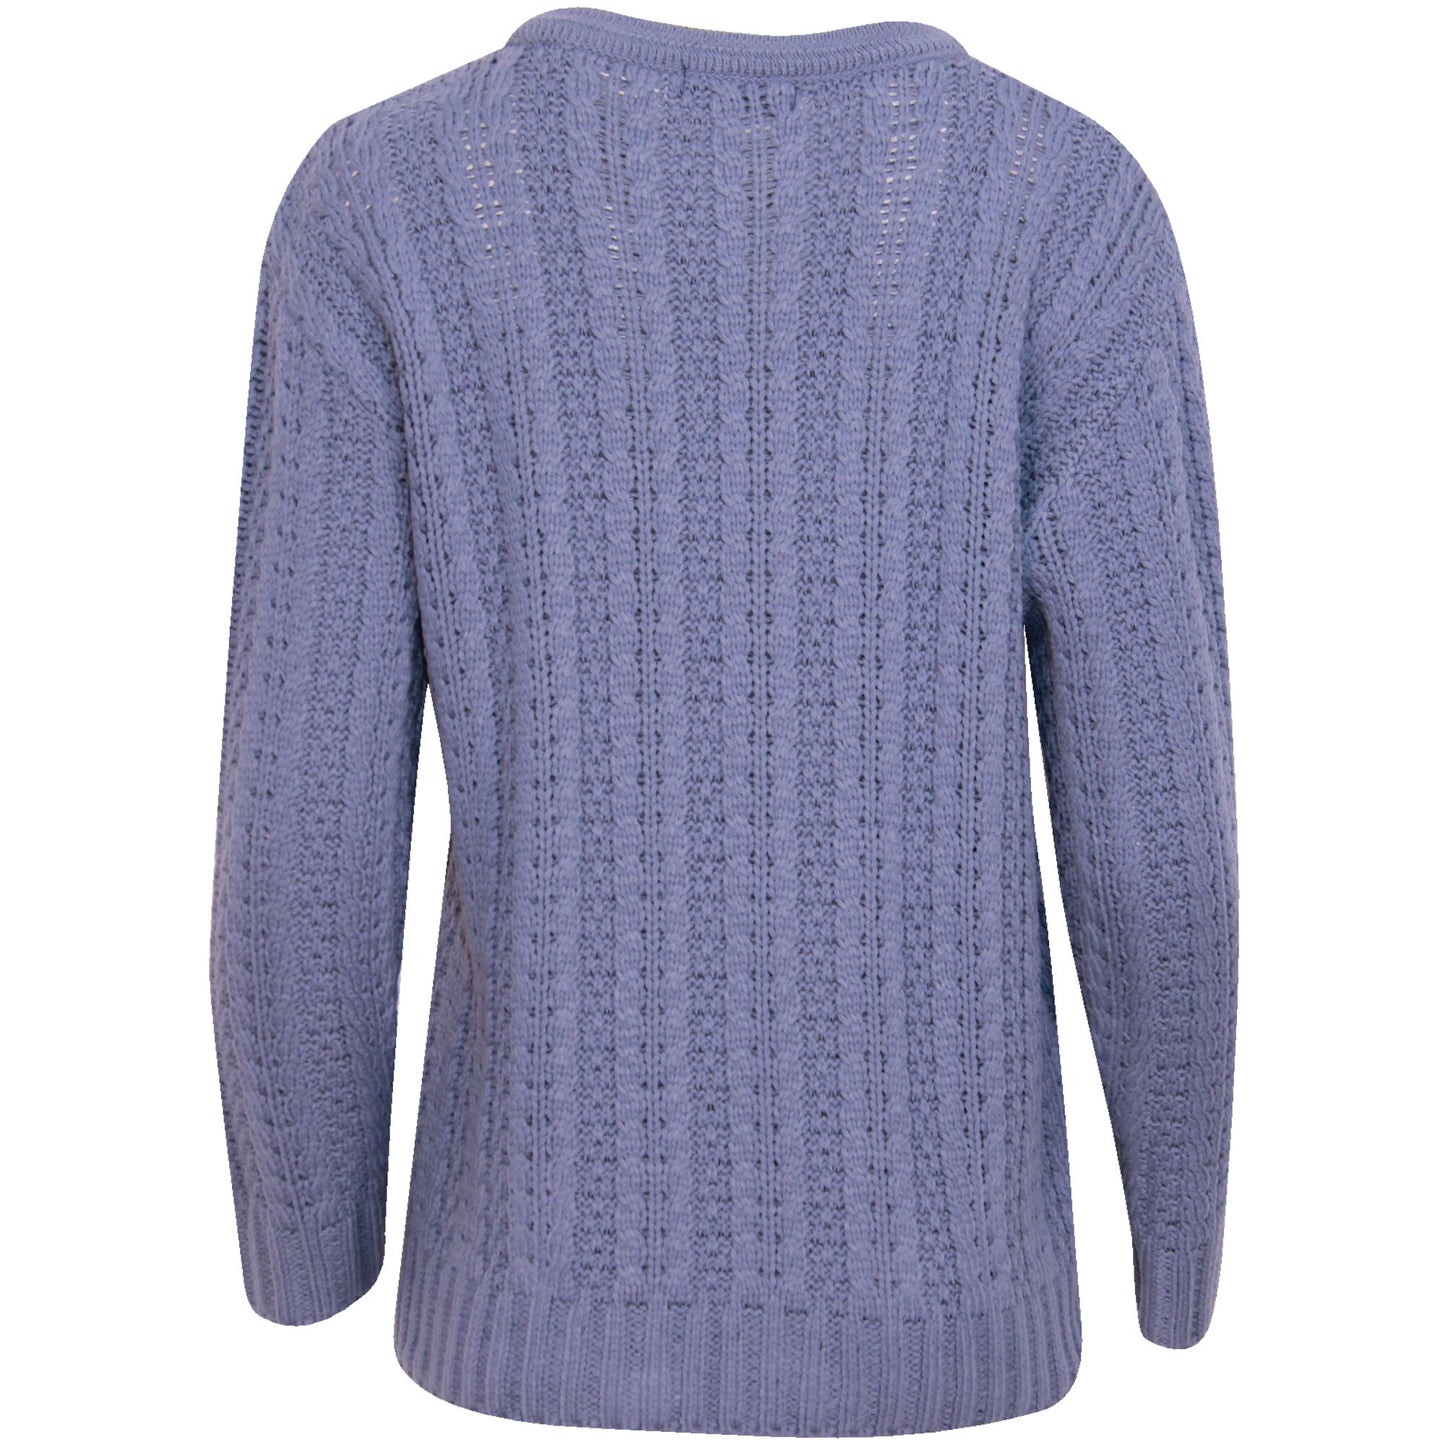 Warm and Cozy: Women's Knitted Aran Jumper for Winter